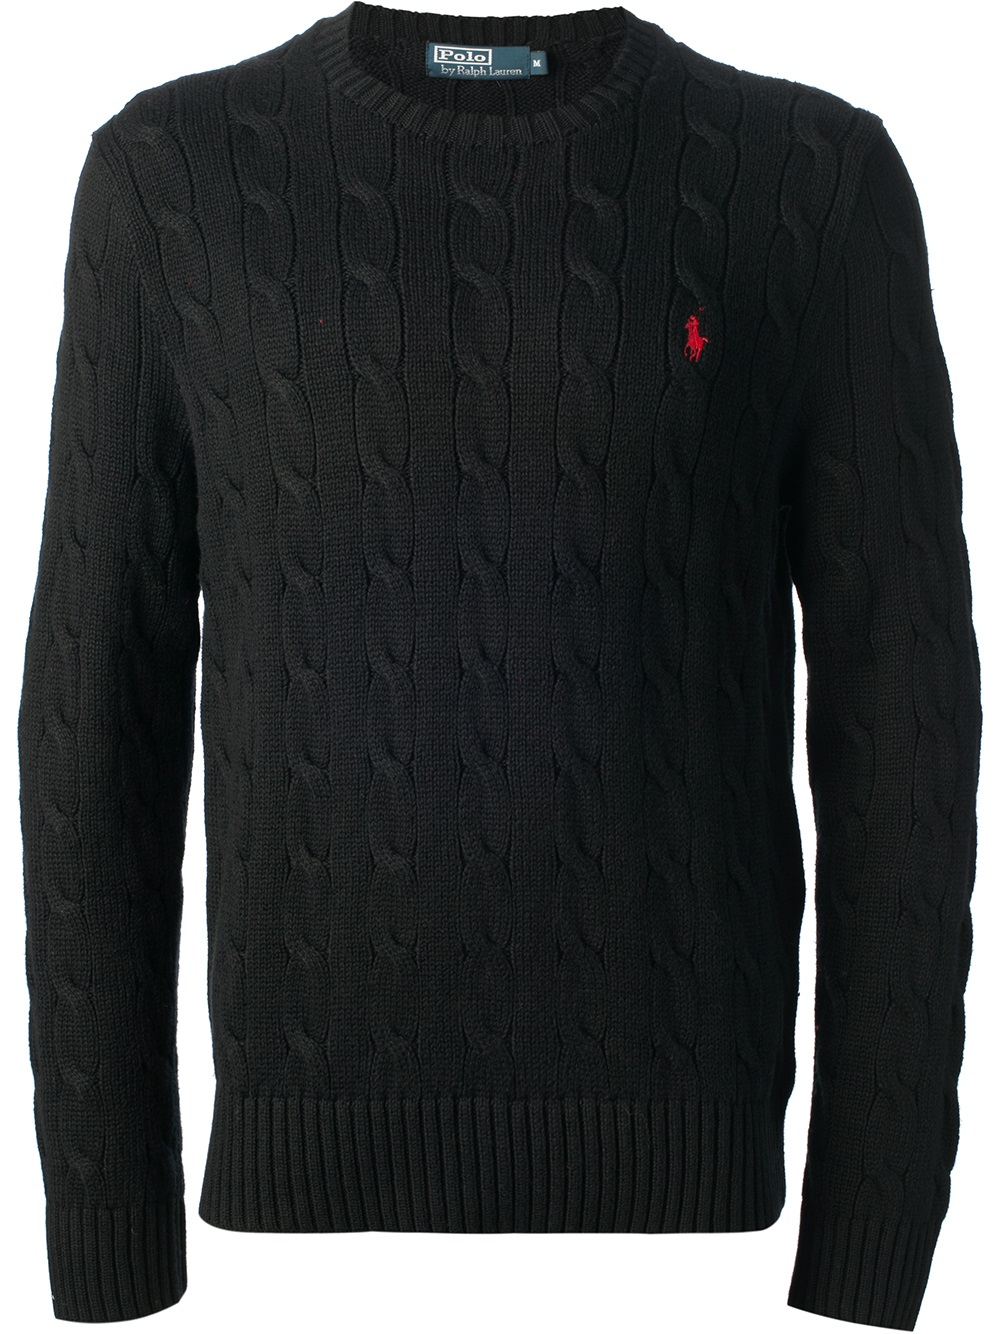 Polo Ralph Lauren Cable Knit Sweater in Black for Men - Lyst